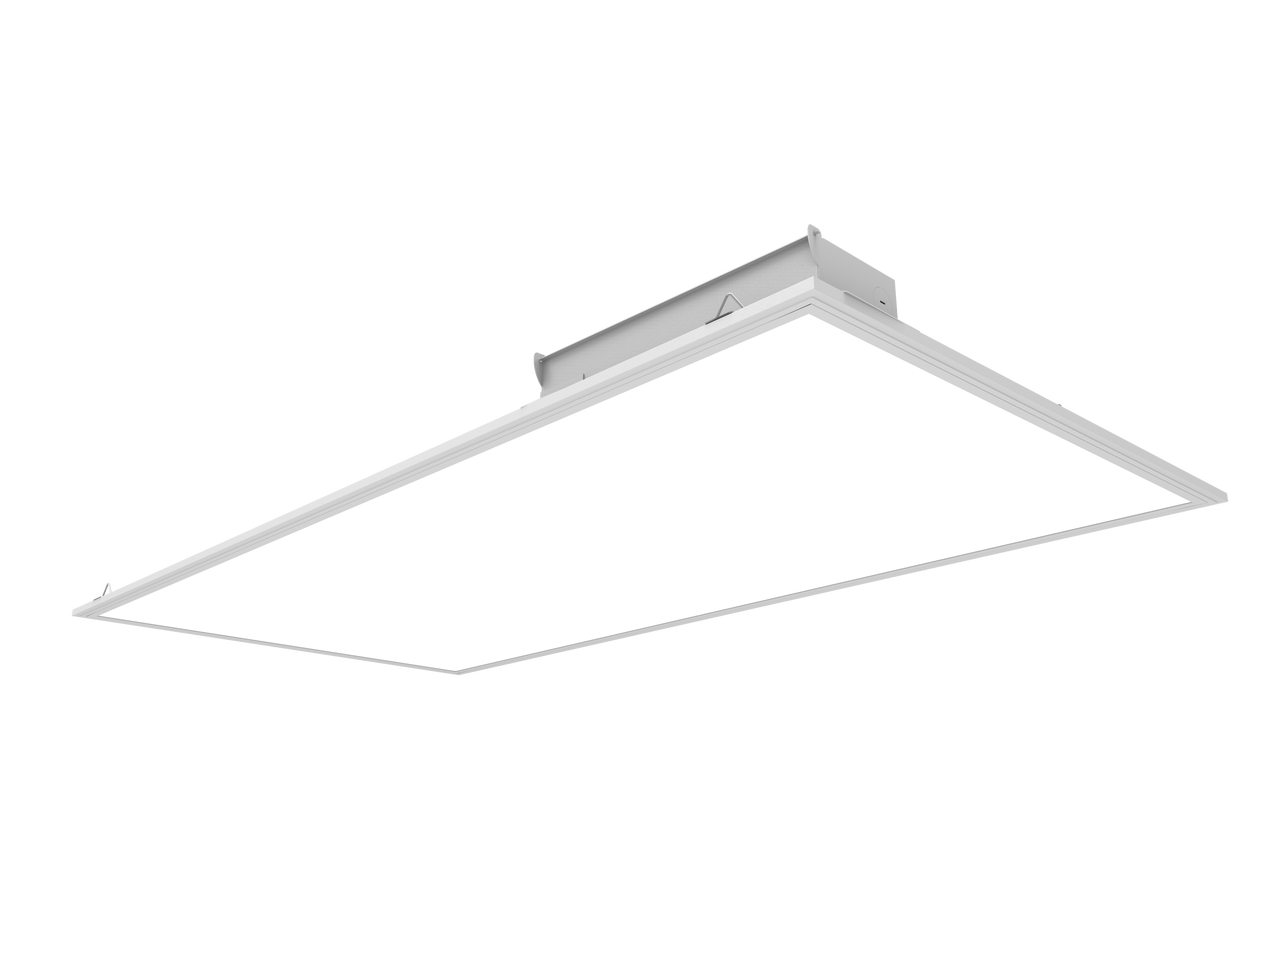 2x4 LED Flat Panel - 40 Watt - 5000 Lumens - 4000K Cool White - 120-277V - Dimmable - For Recessed Drop Ceiling